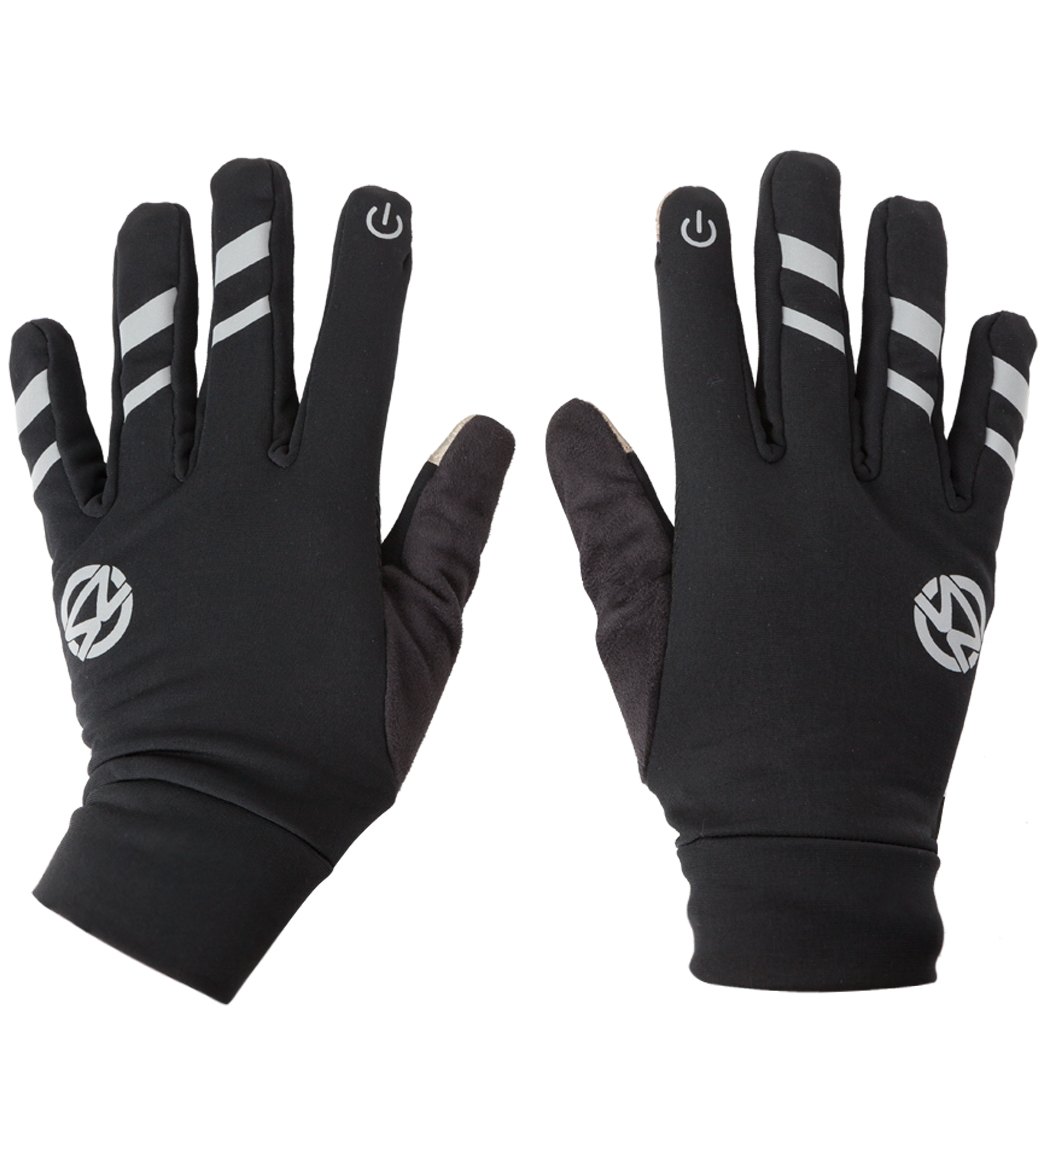 Zensah Smart Running Gloves With Touchscreen Capability - Black Large Size Large - Swimoutlet.com